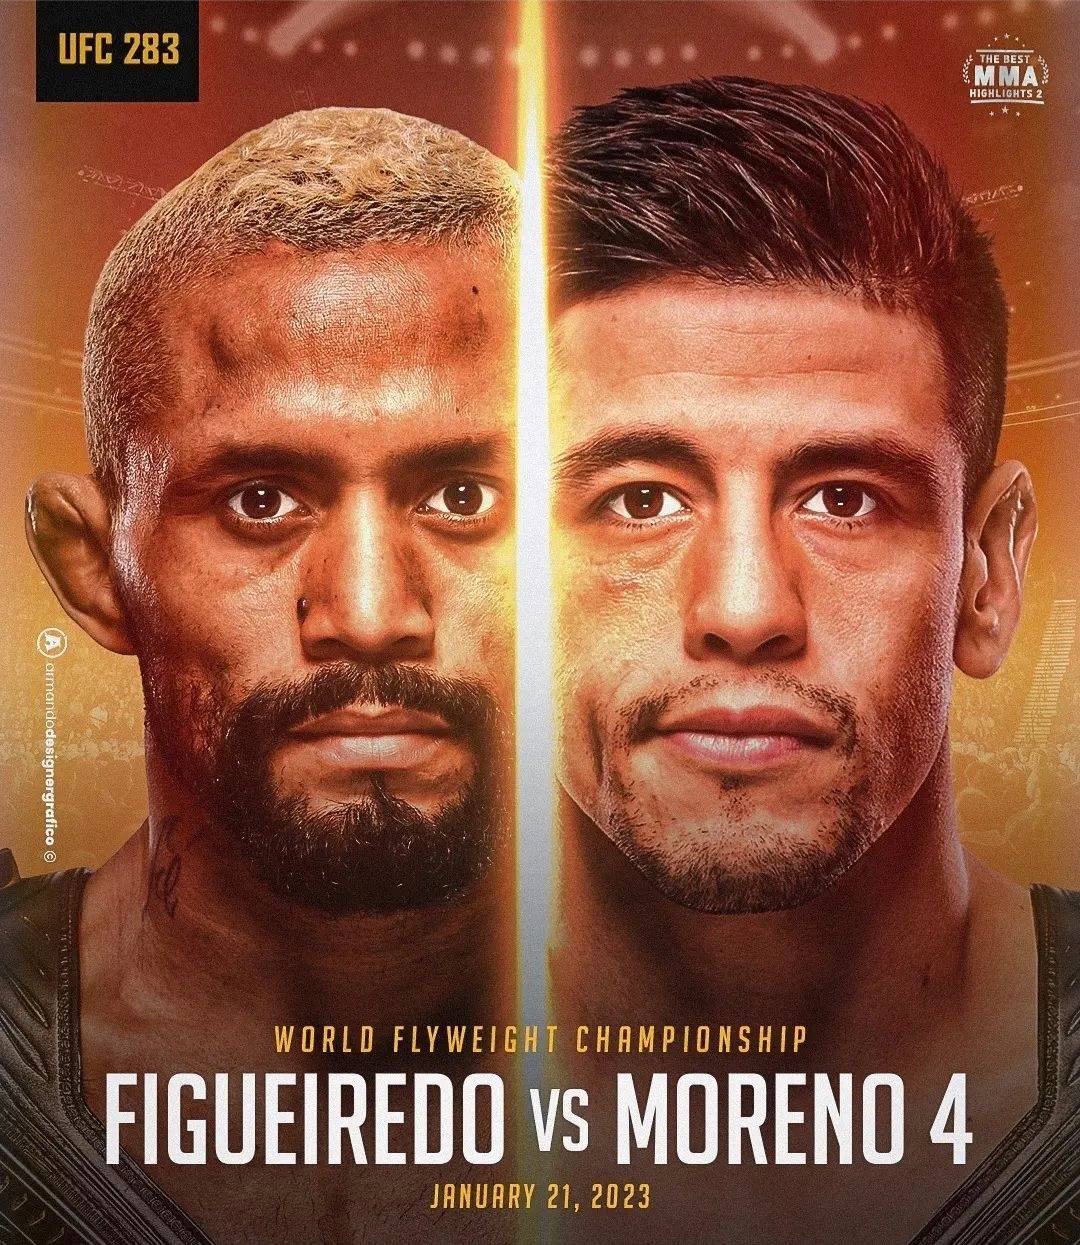 UFC 283 Figueiredo vs Moreno 4 Tickets at Sapphire 60 in New York by Sapphire Tixr